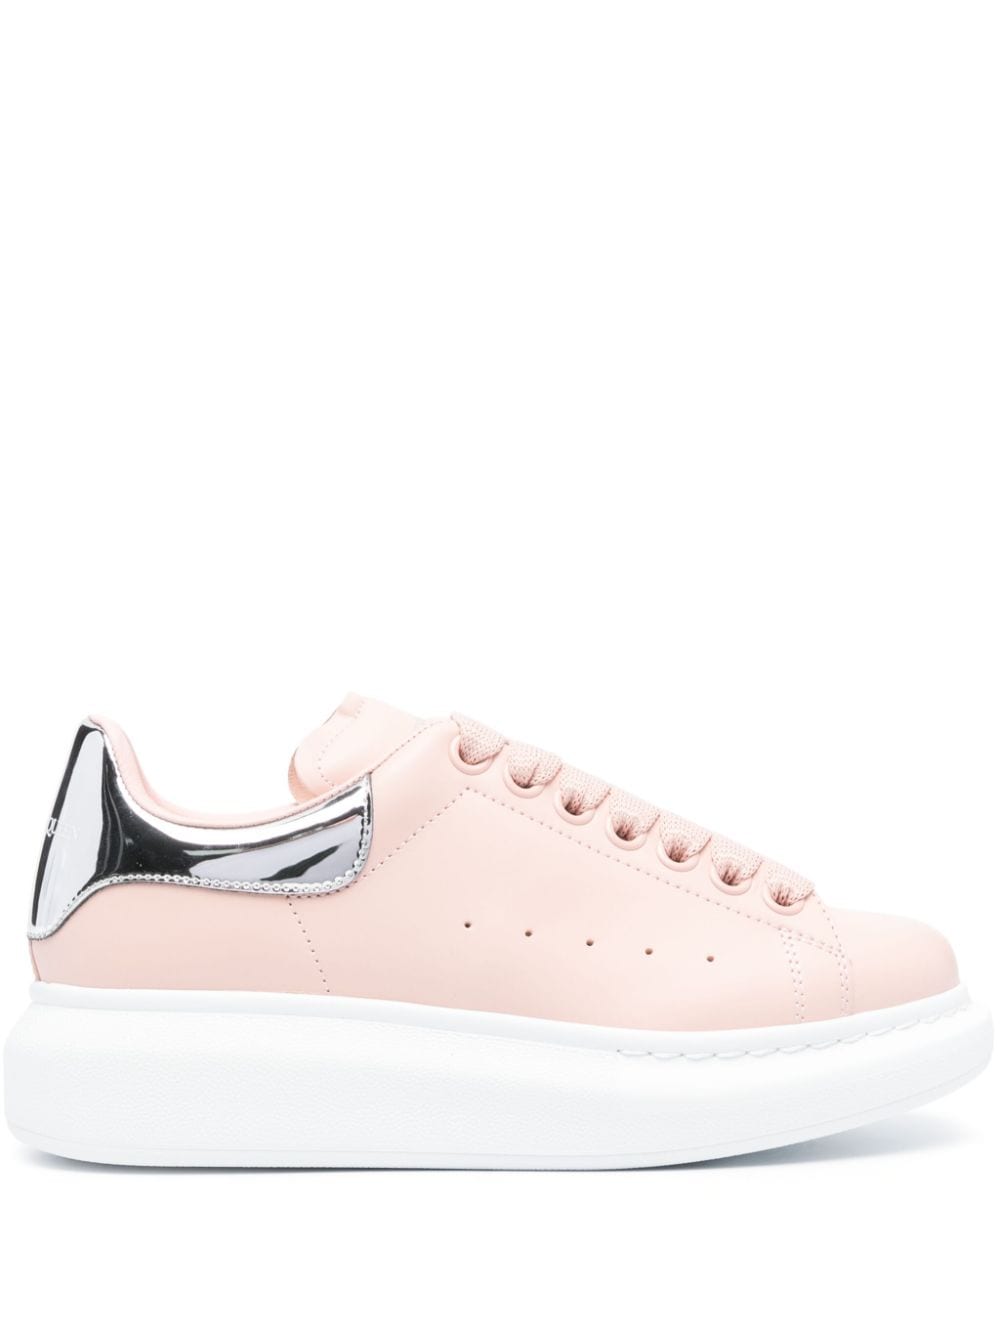 Alexander Mcqueen Mirrored-finish Leather Platform Trainers In Pink